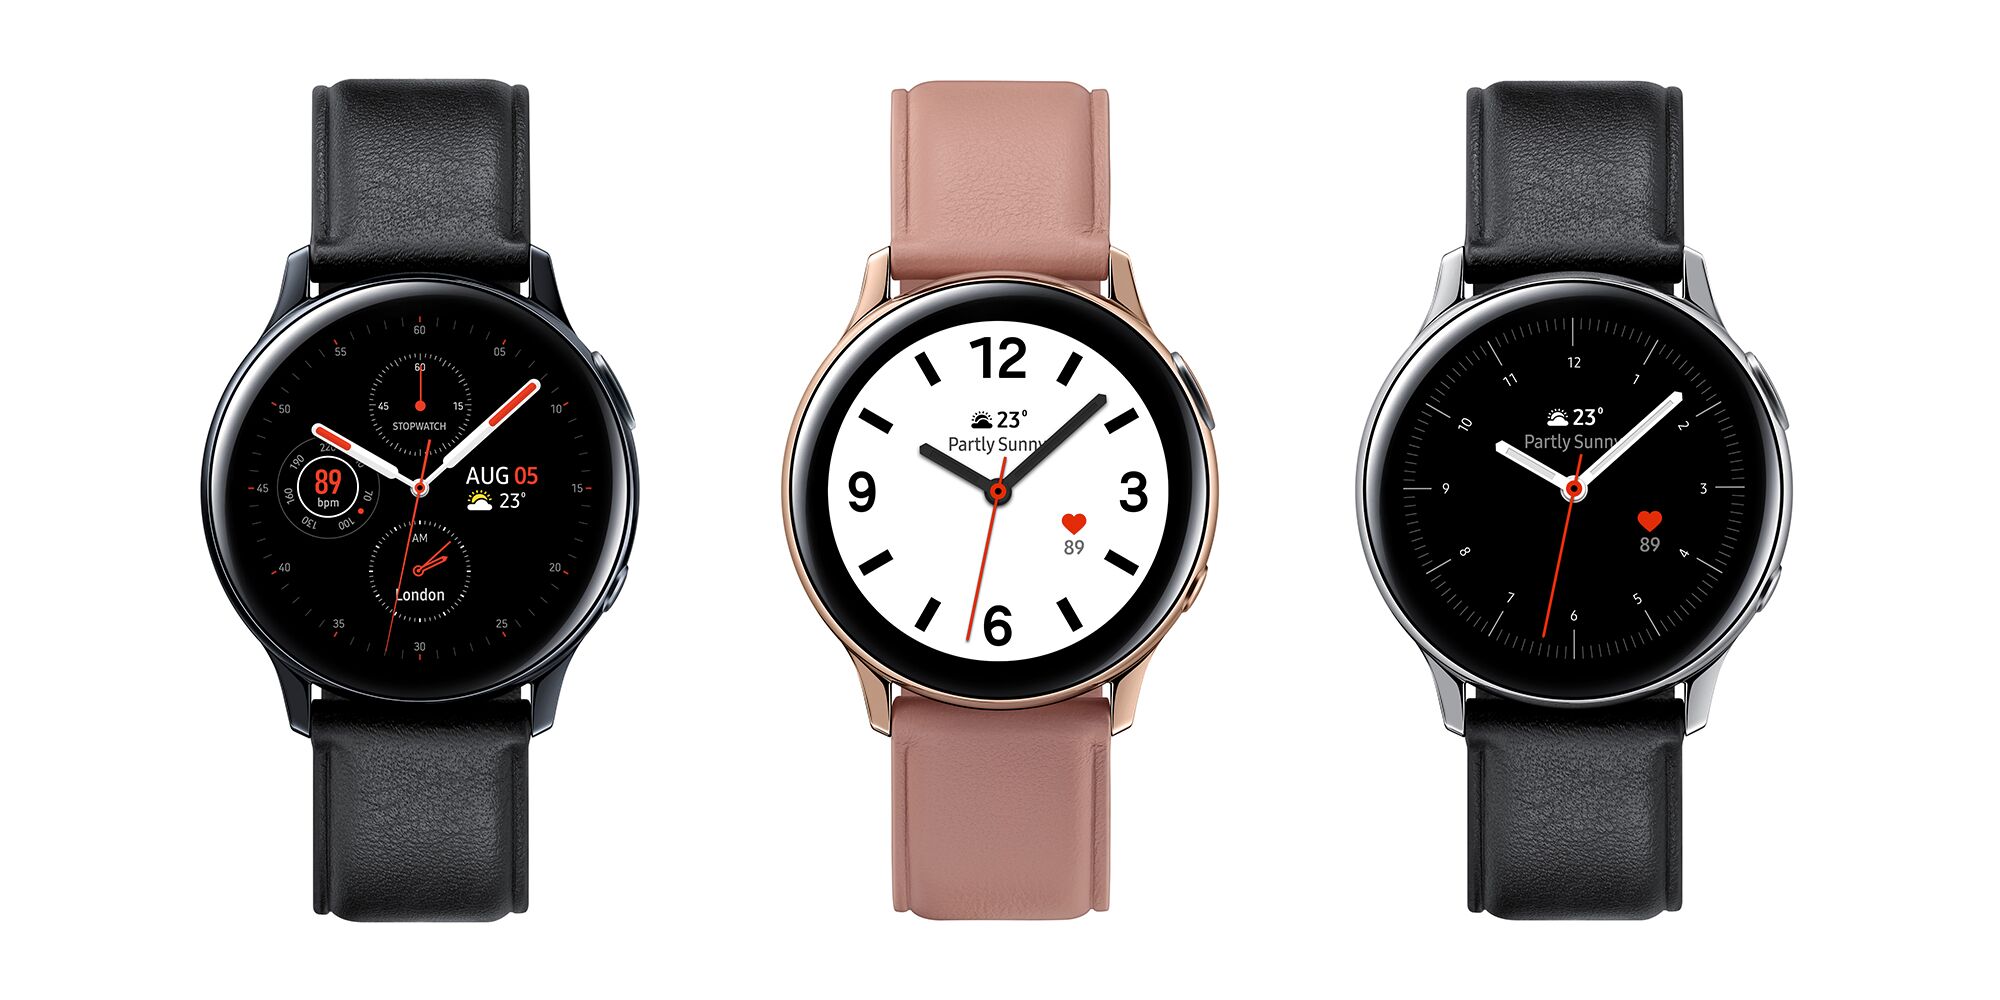 Samsung has announced a new Galaxy Watch to release in October